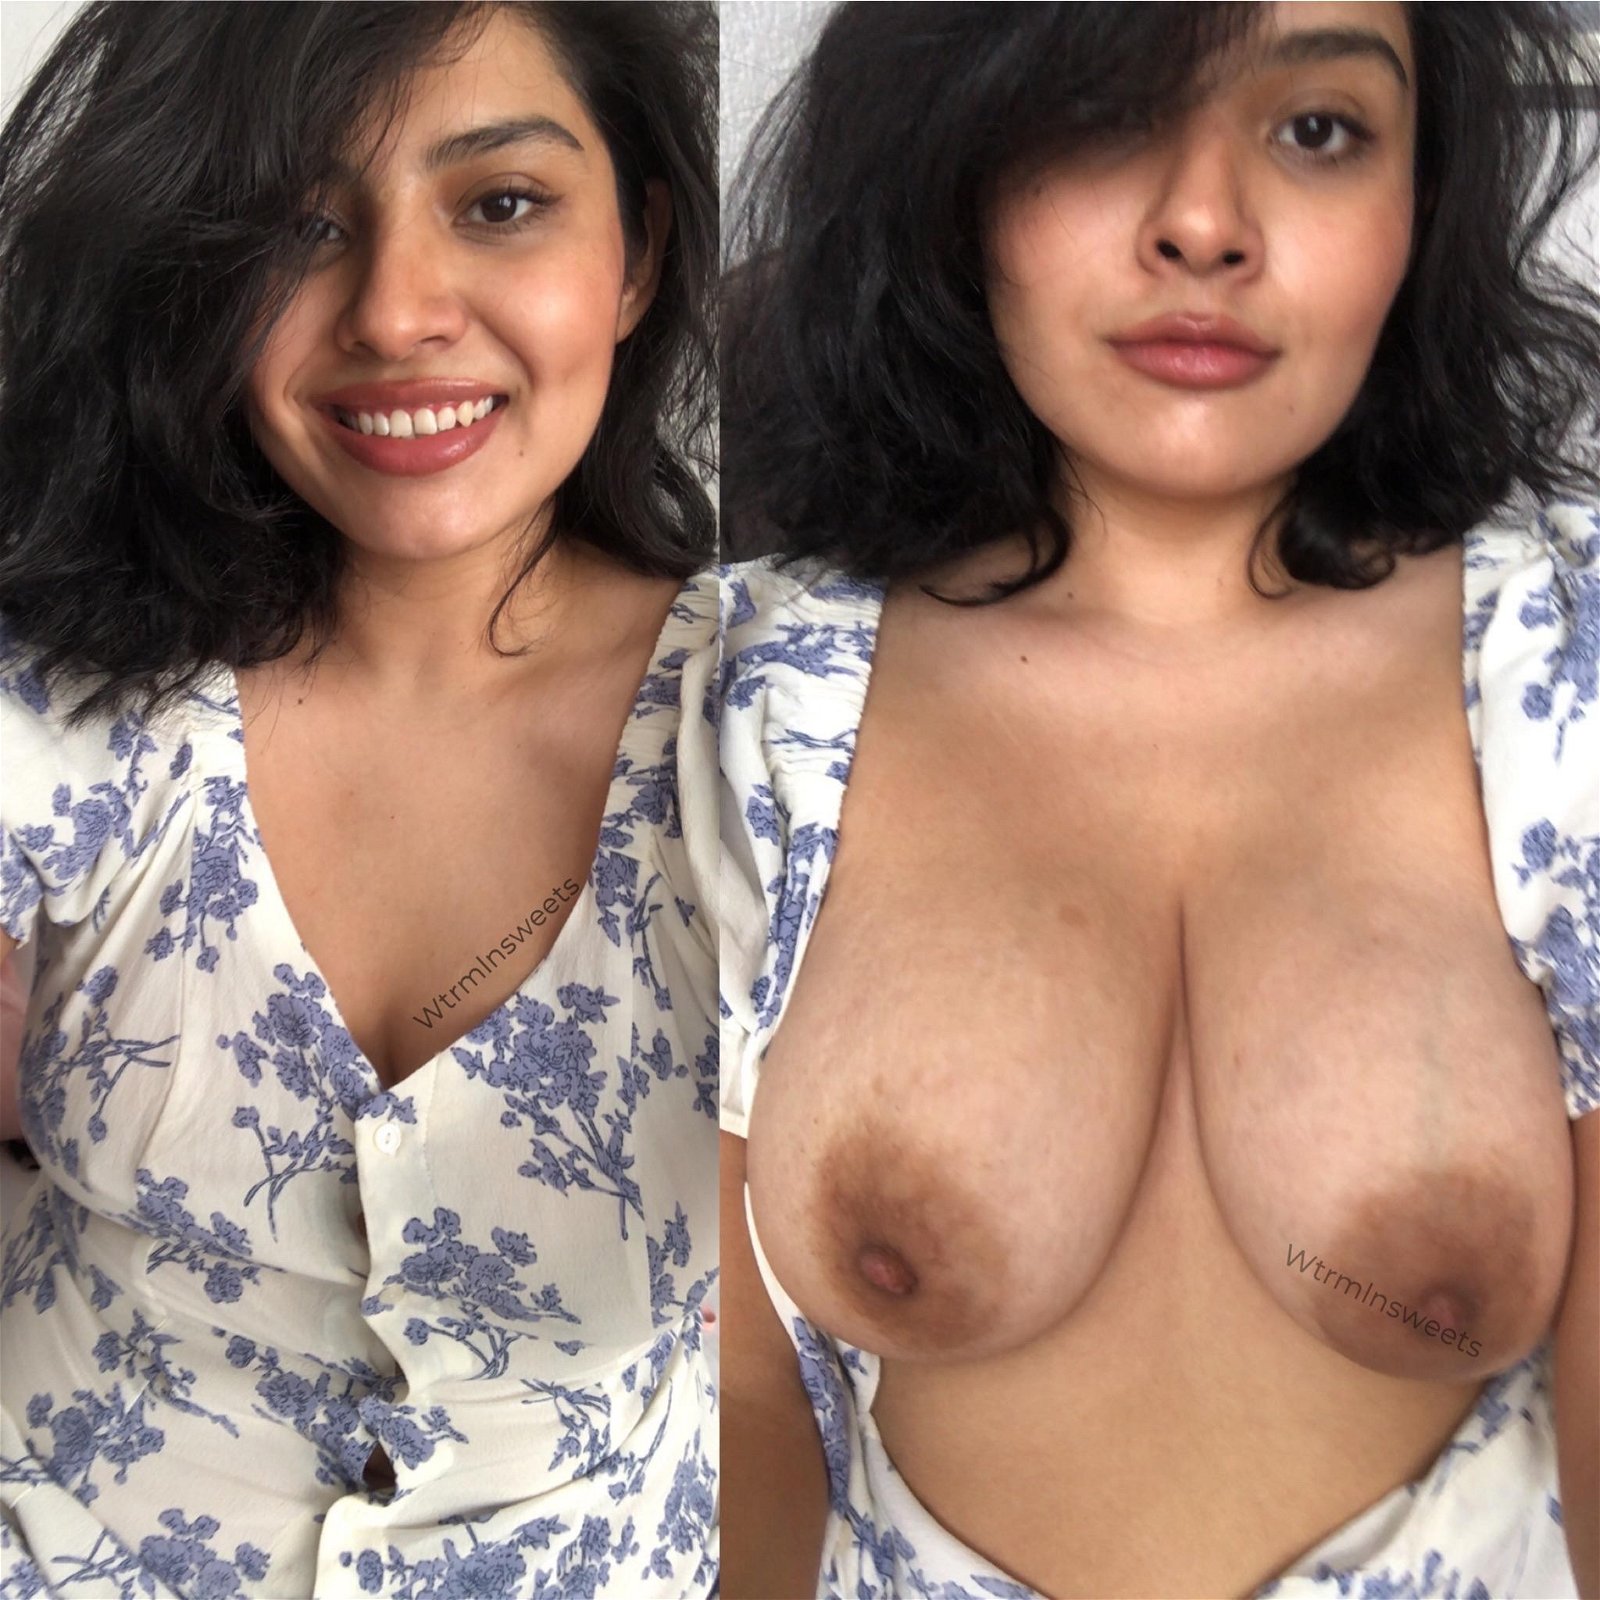 Watch the Photo by wilderness4 with the username @rockyzack4, posted on January 9, 2021 and the text says '#sexy #busty #thick #onoff'